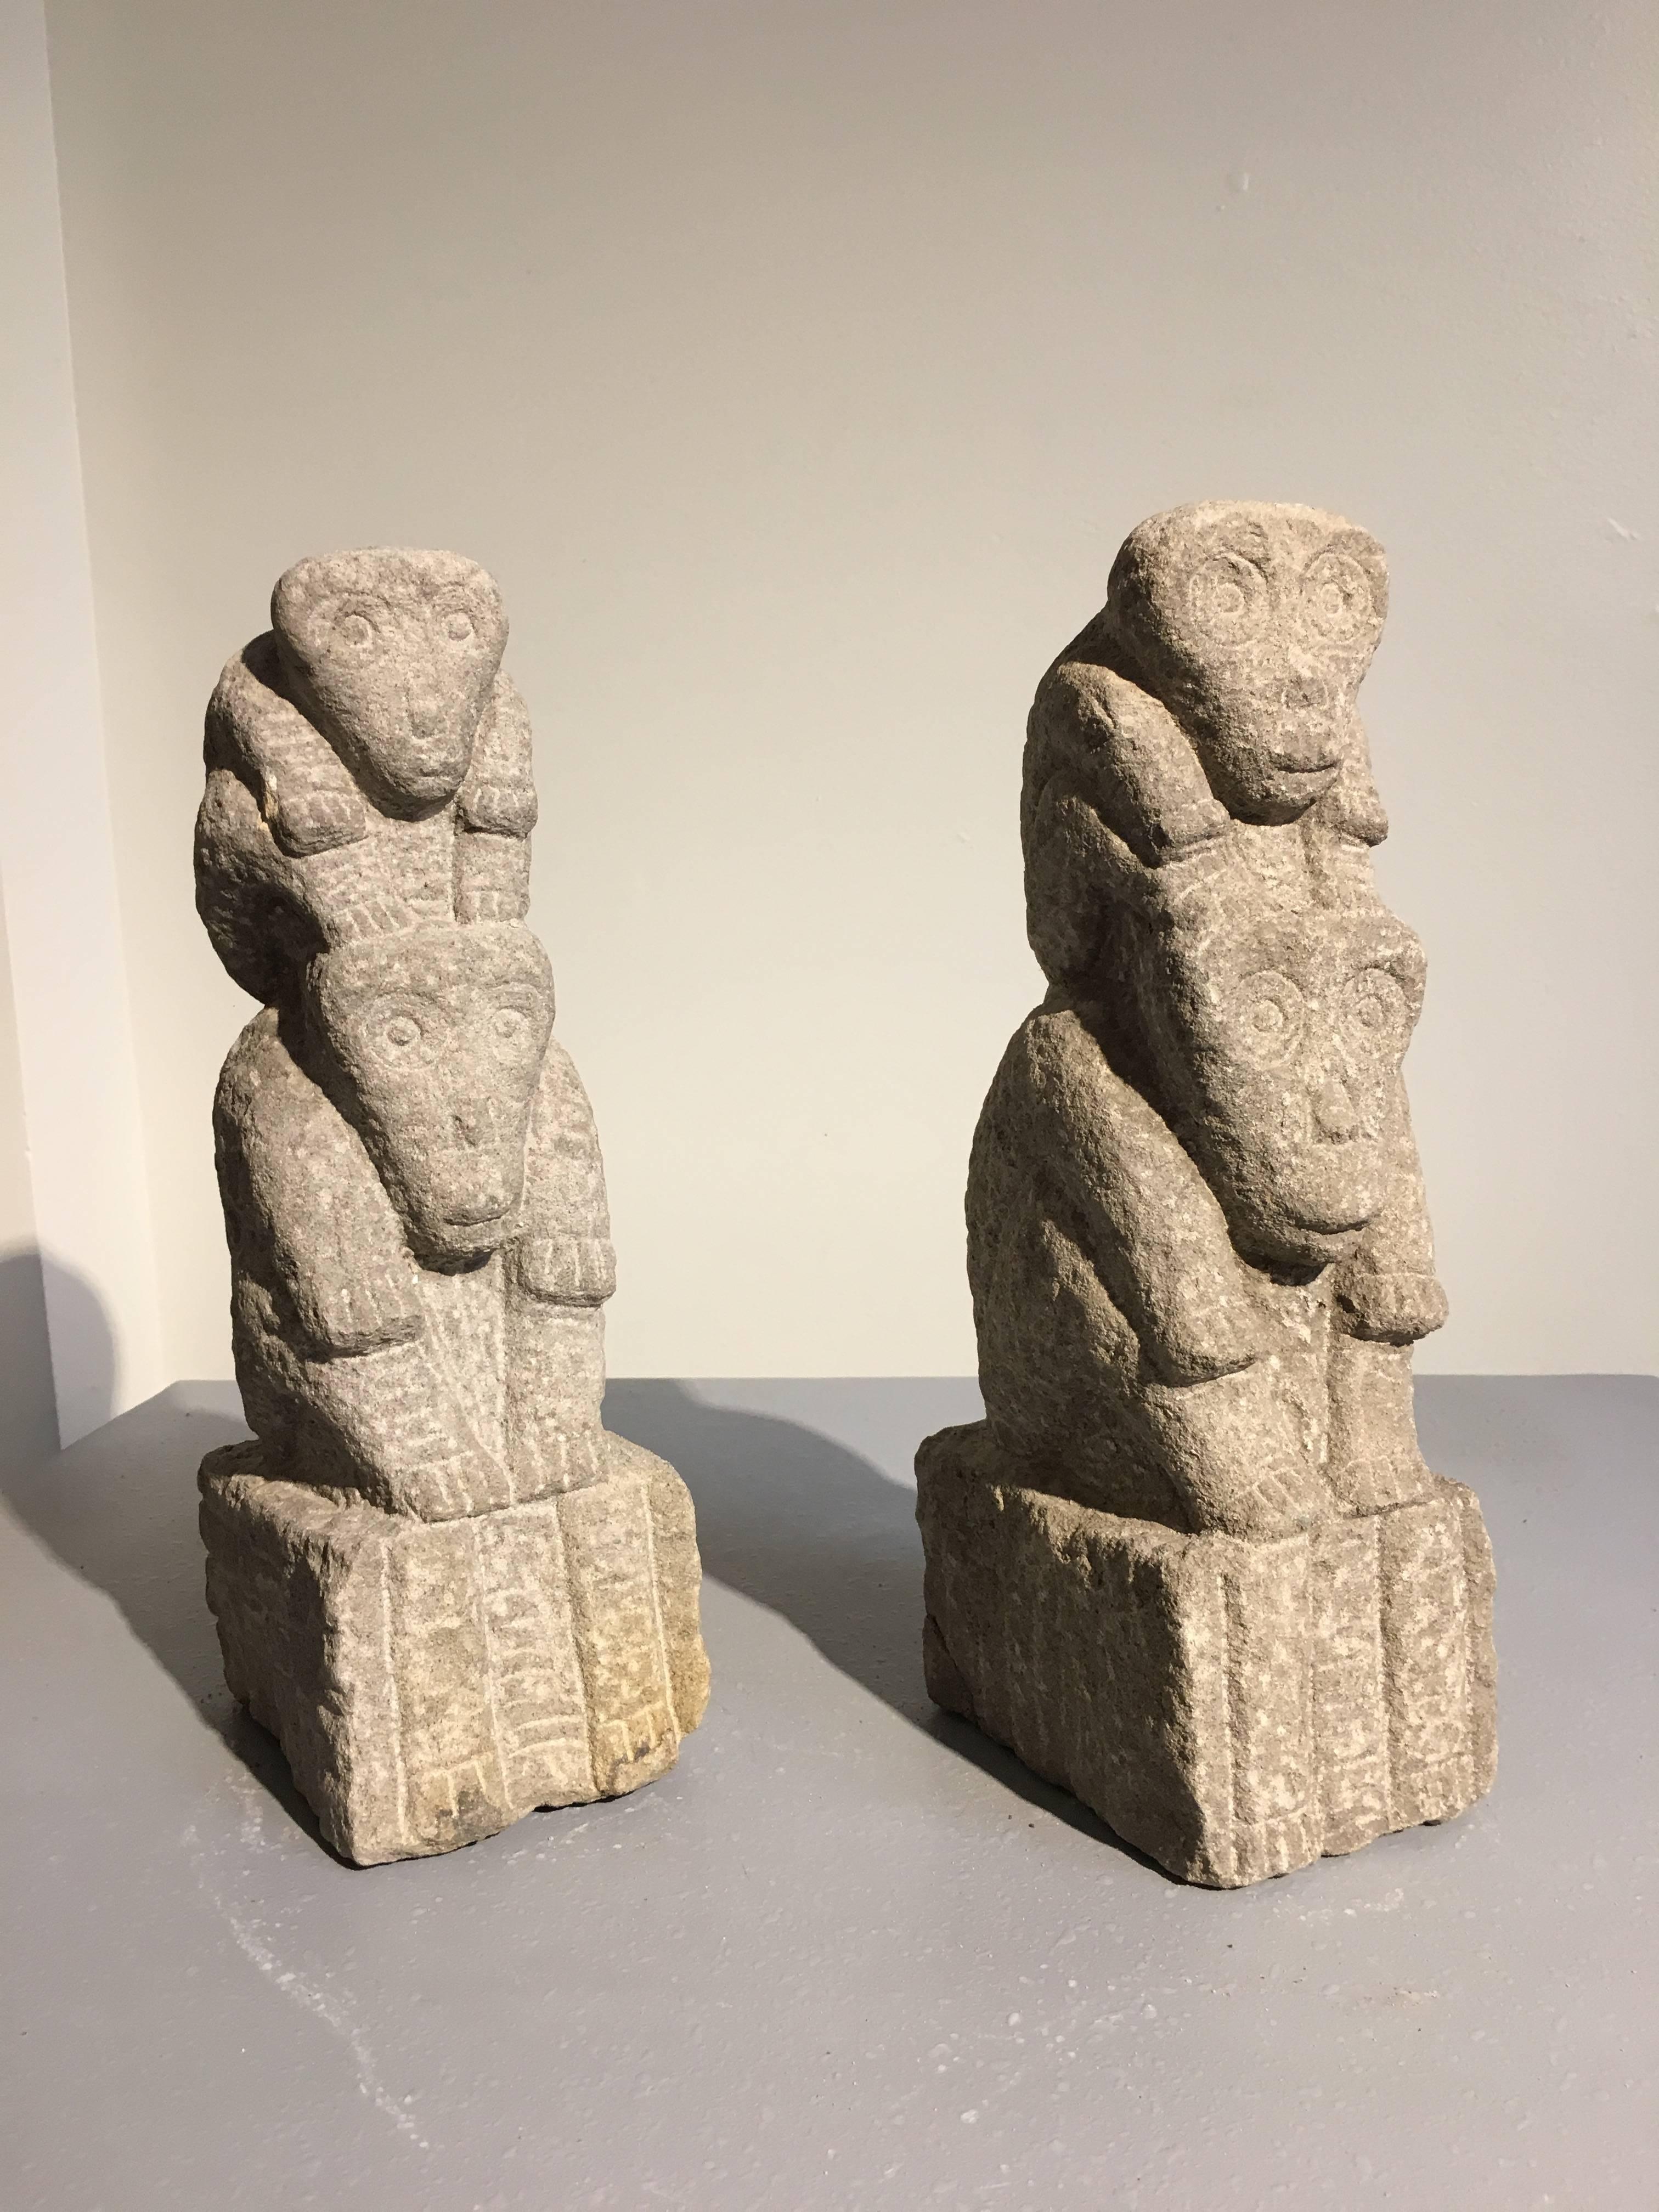 A pair of intriguing and delightful carved sandstone monkey totems from Yunnan, China.
Each TOTEM featuring two monkeys, a smaller monkey resting upon the back of a larger one. Portrayed sitting firmly on their haunches, with hands resting on their